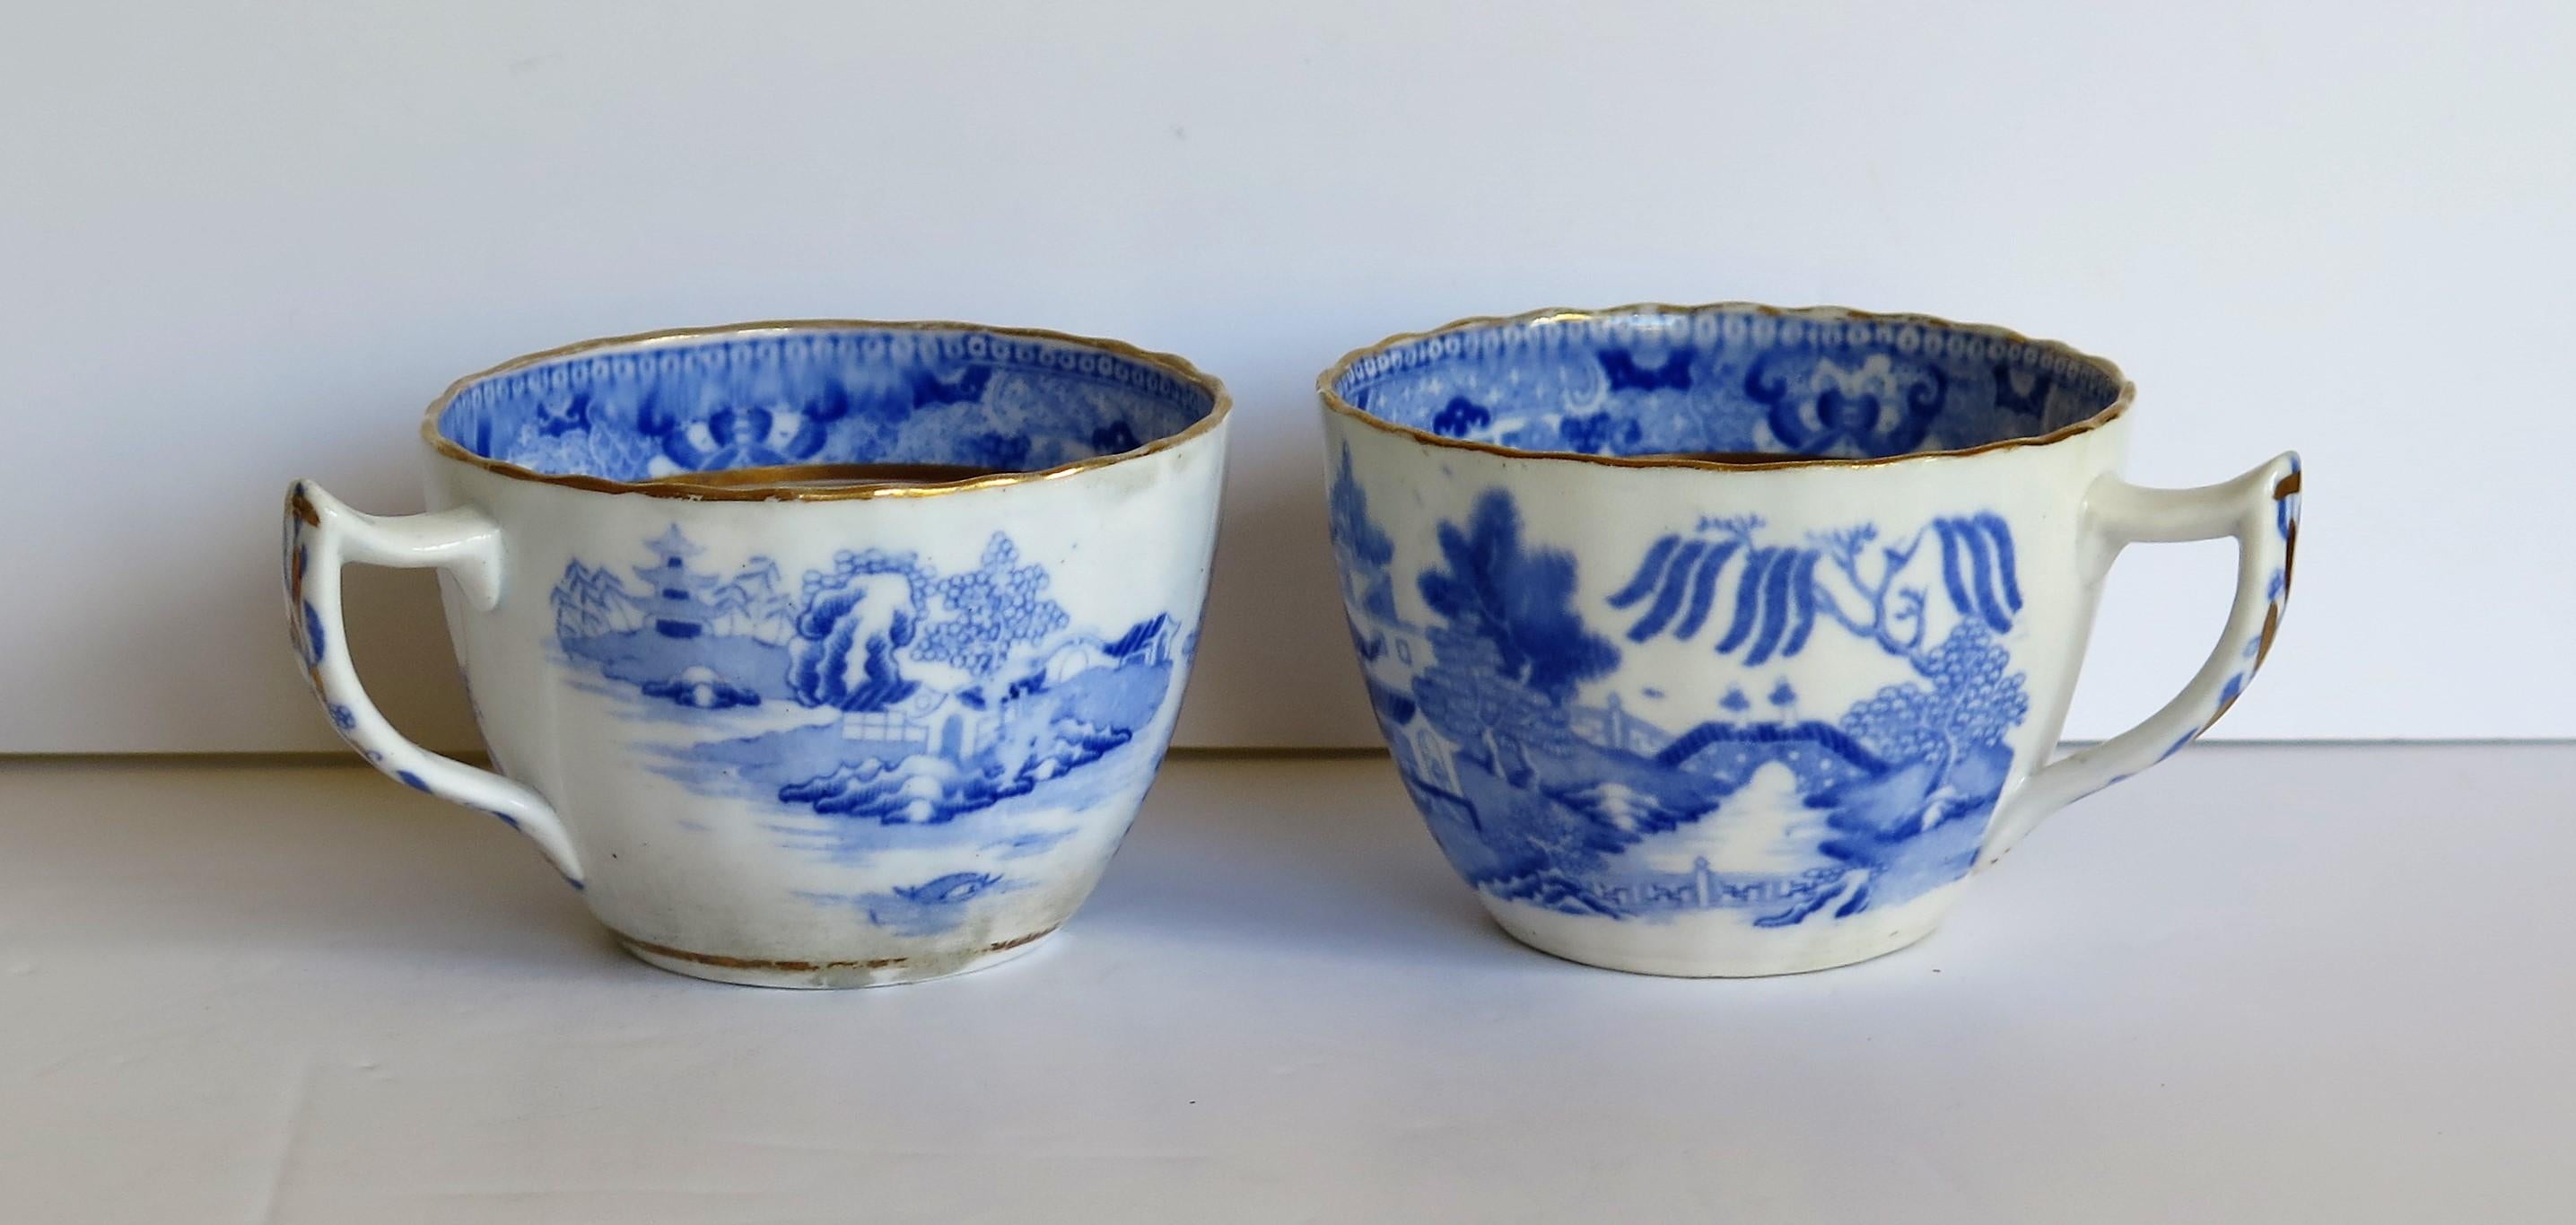 Glazed Miles Mason Porcelain Pair of Tea Cups Broseley Blue and White Pattern, Ca 1805